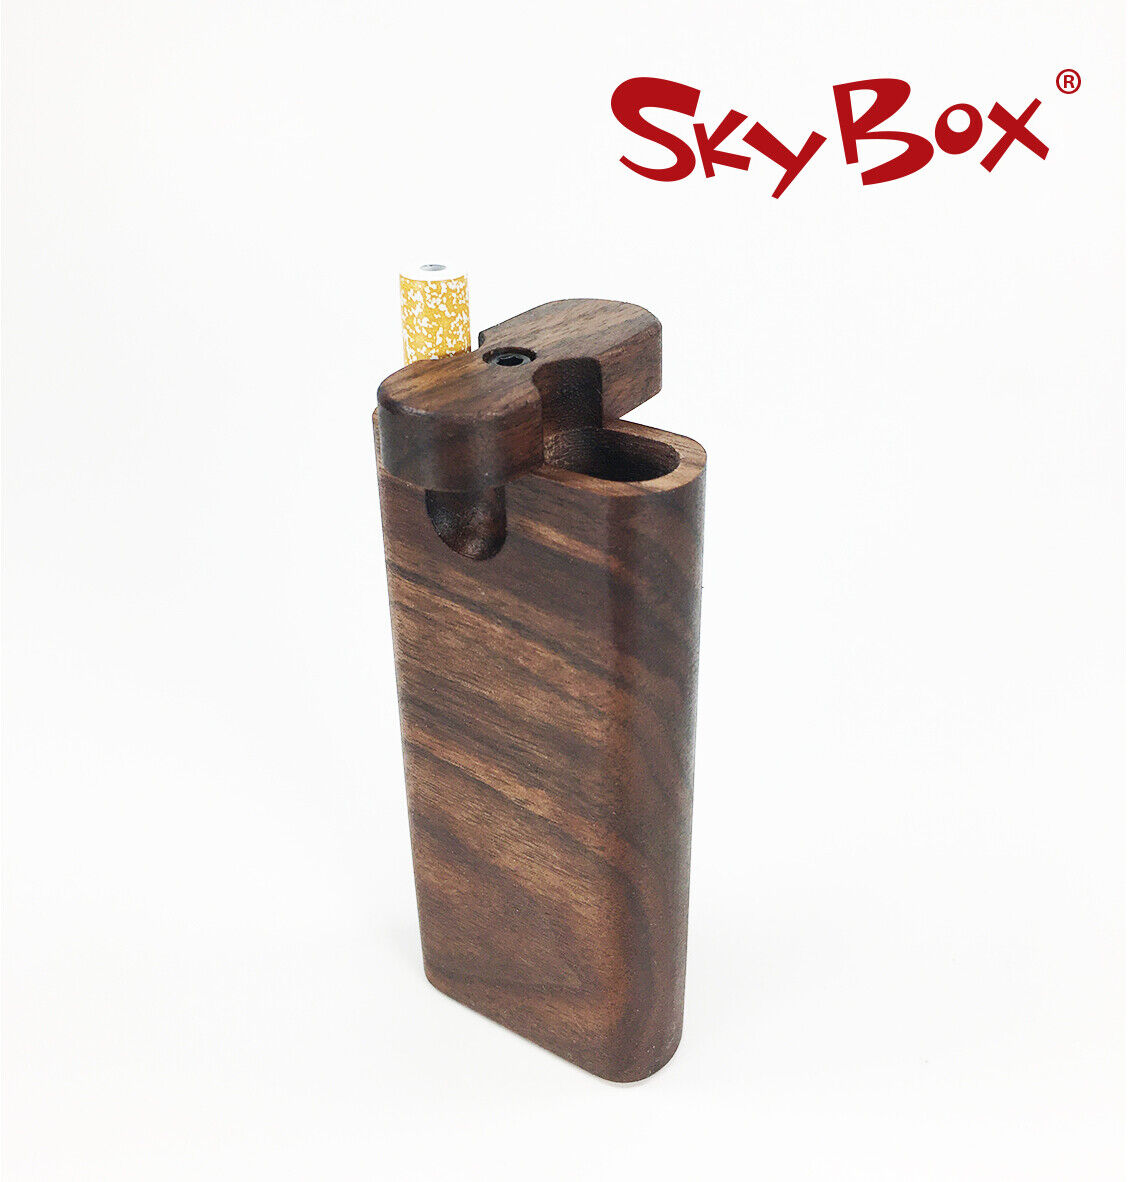 SkyBox® dugout -  Walnut Spin Top dugout with Large Cigarette Style Pipe